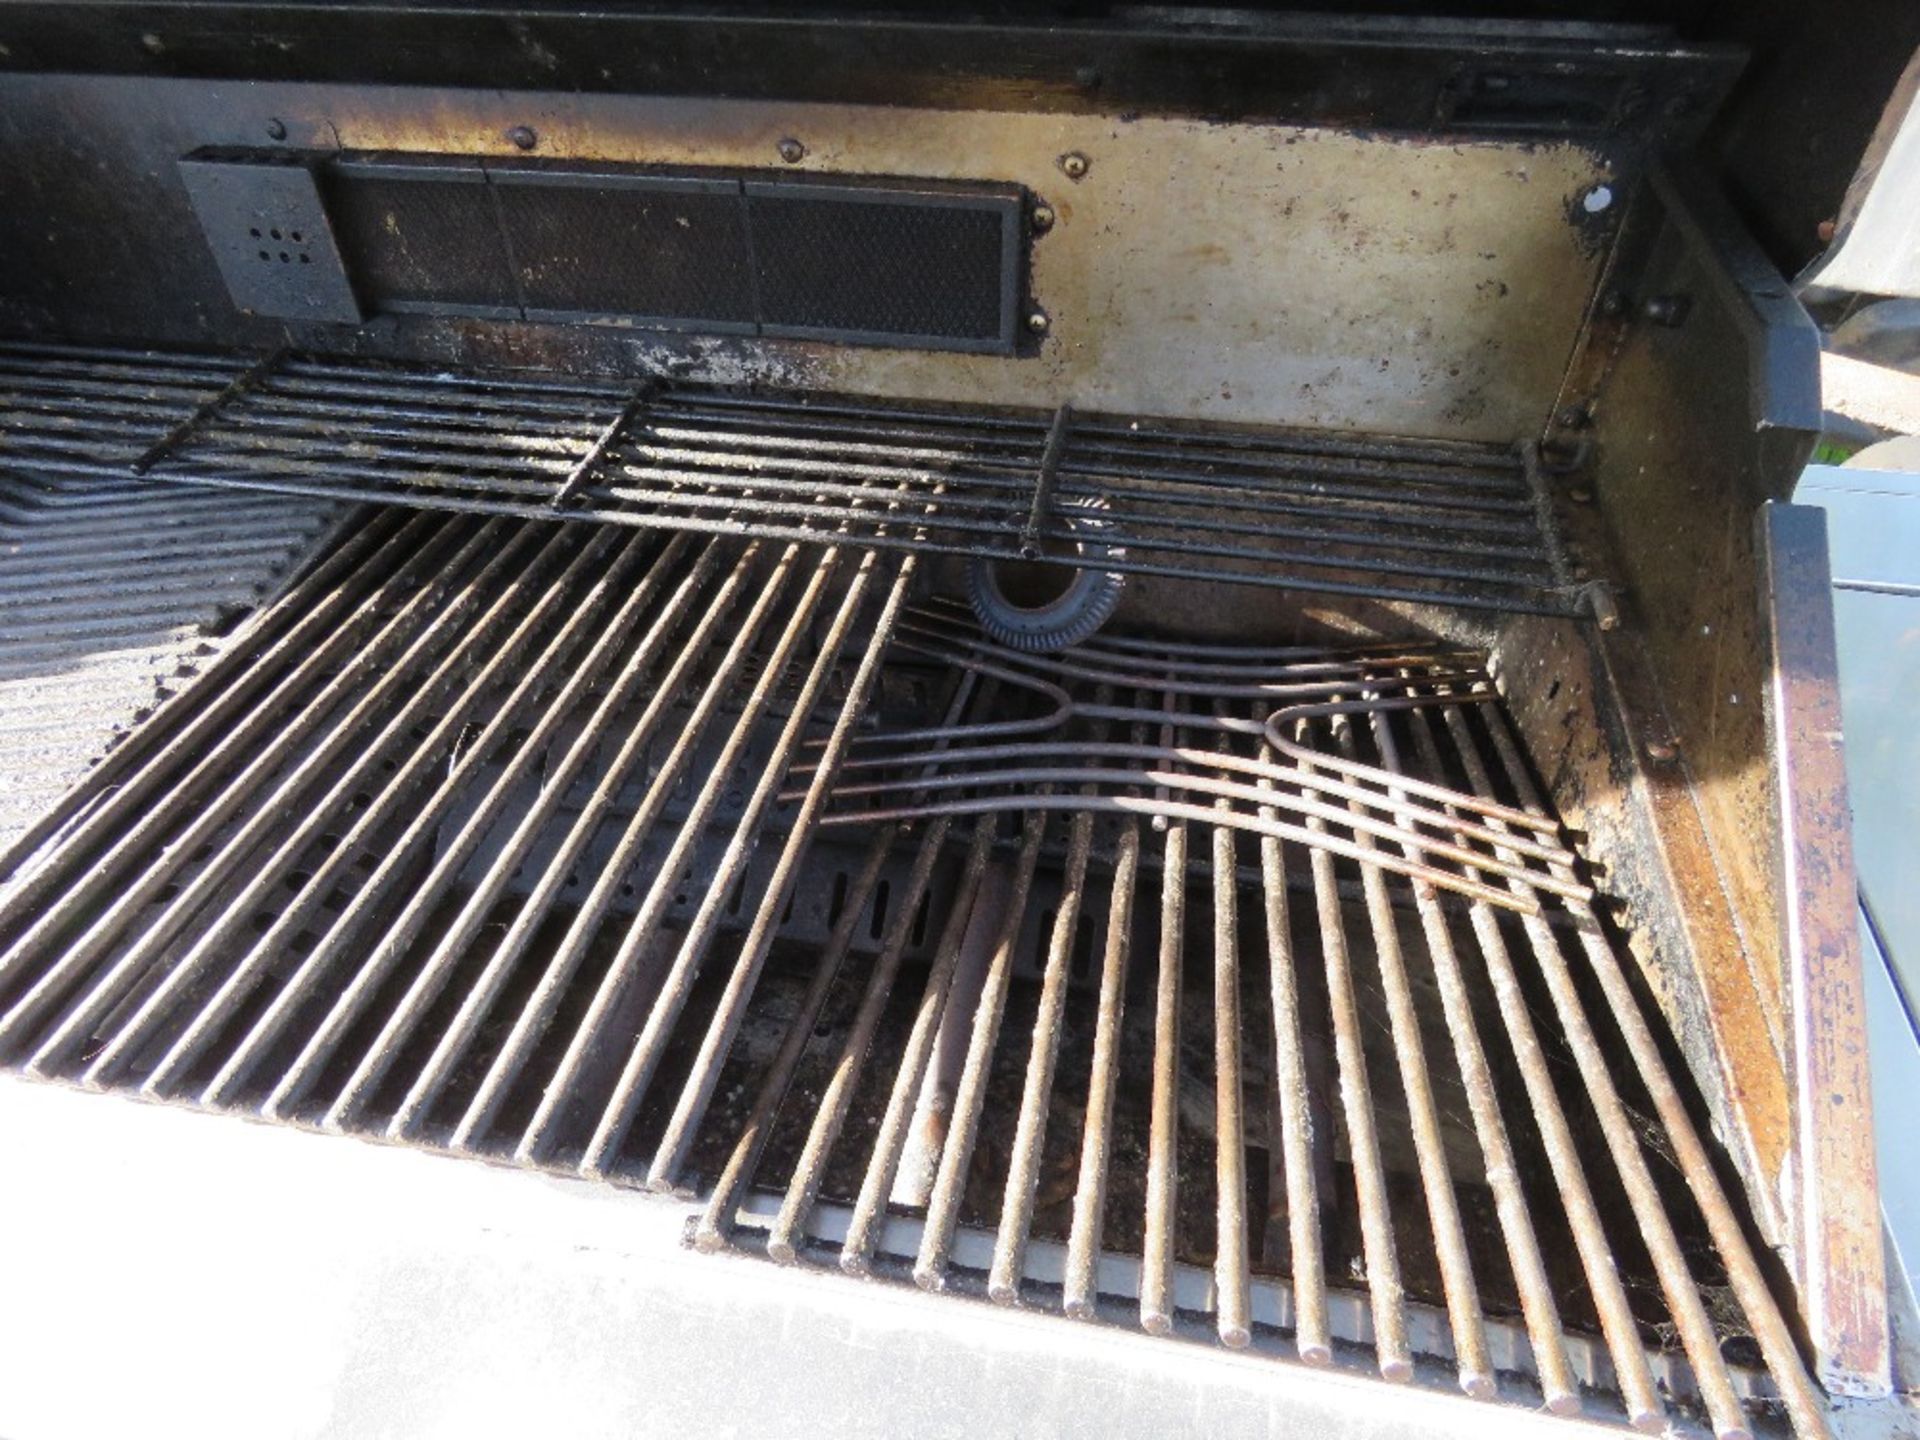 3X INDUSTRIAL BARBEQUES AND STAINLESS STEEL SINK UNIT. THIS LOT IS SOLD UNDER THE AUCTIONEERS MA - Image 6 of 6